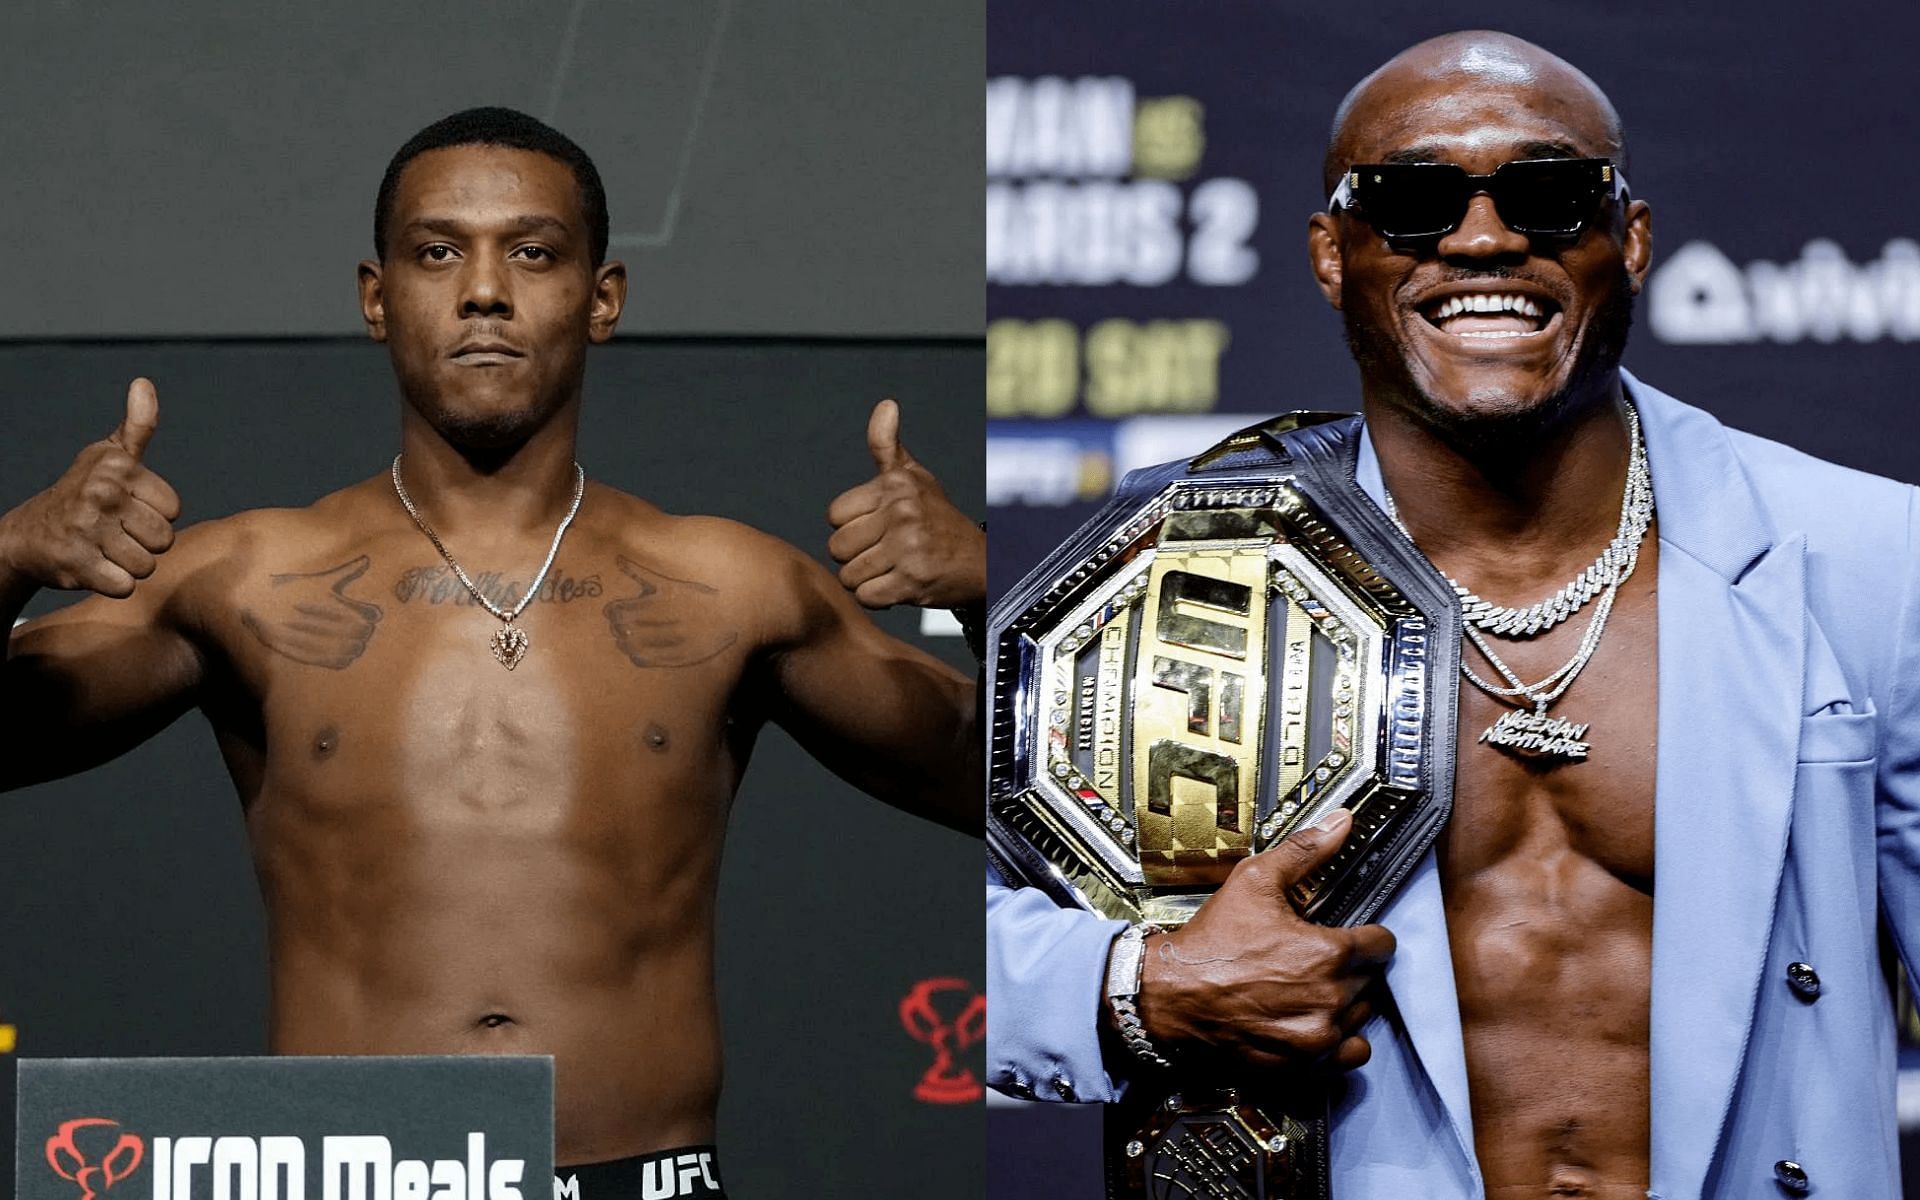 Jamahal Hill (left) and Kamaru Usman (right) [Images courtesy of Getty]